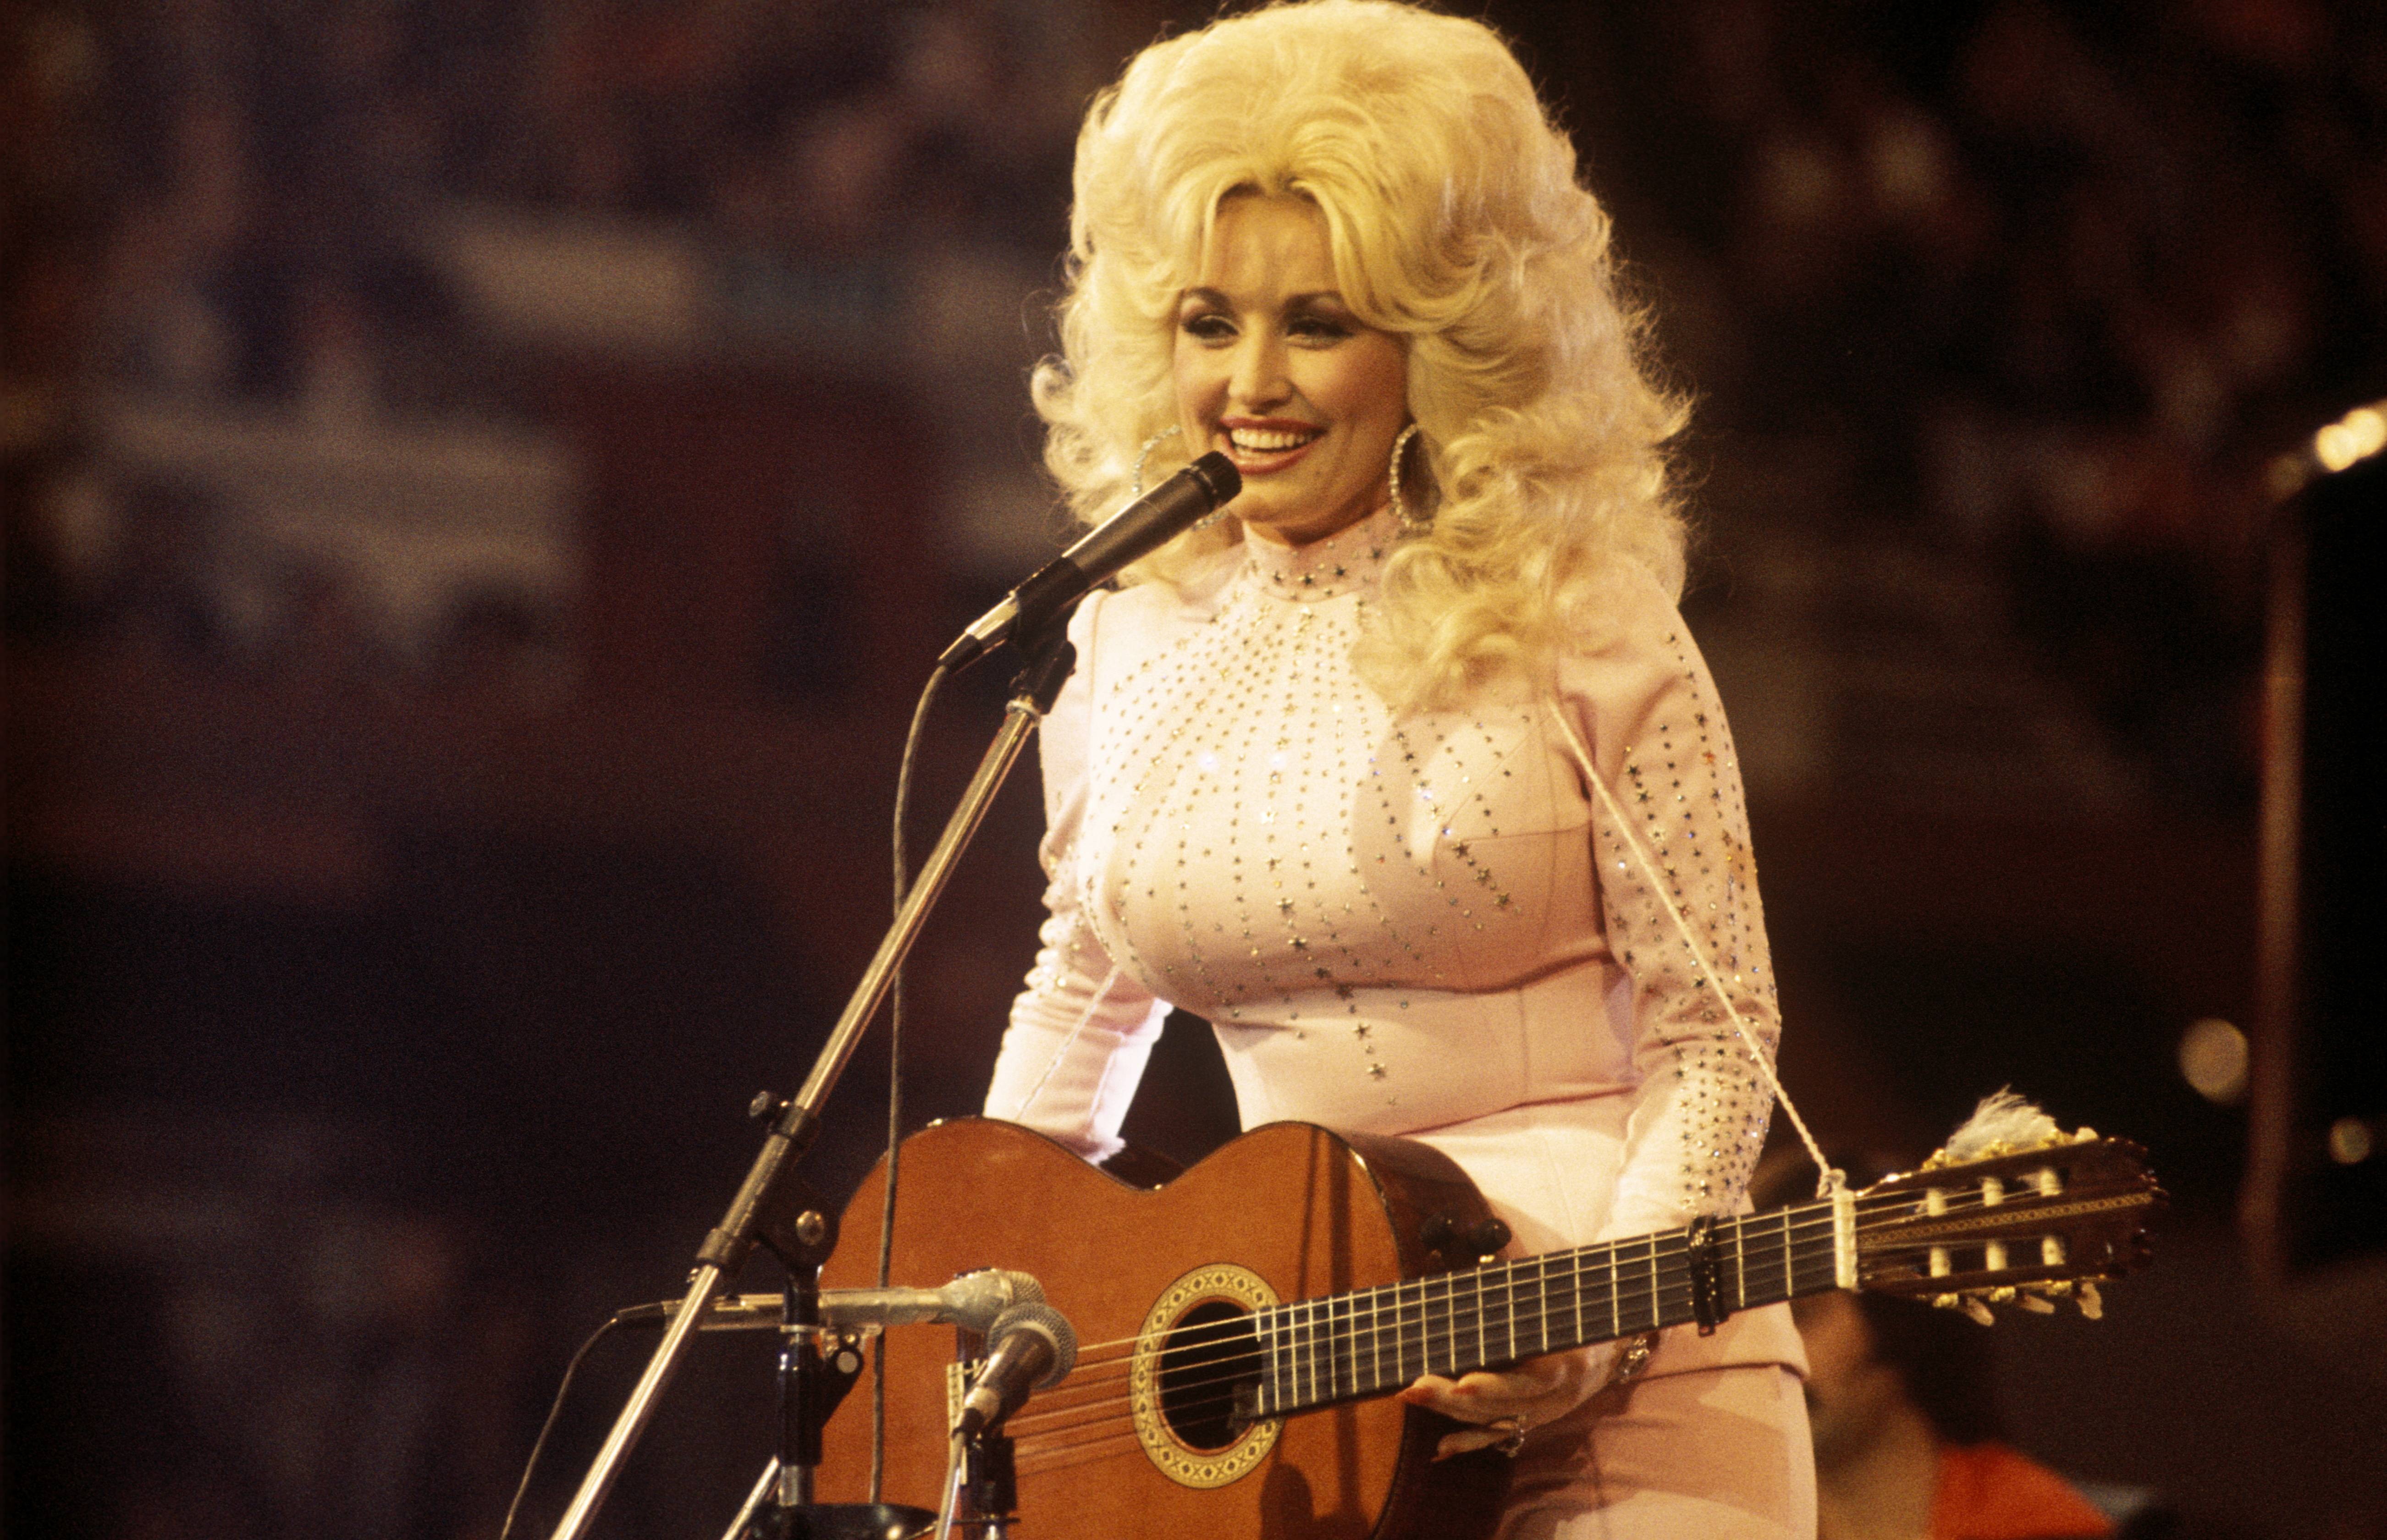 Why Does Dolly Parton Wear Fingerless Gloves and Cover Her Hands